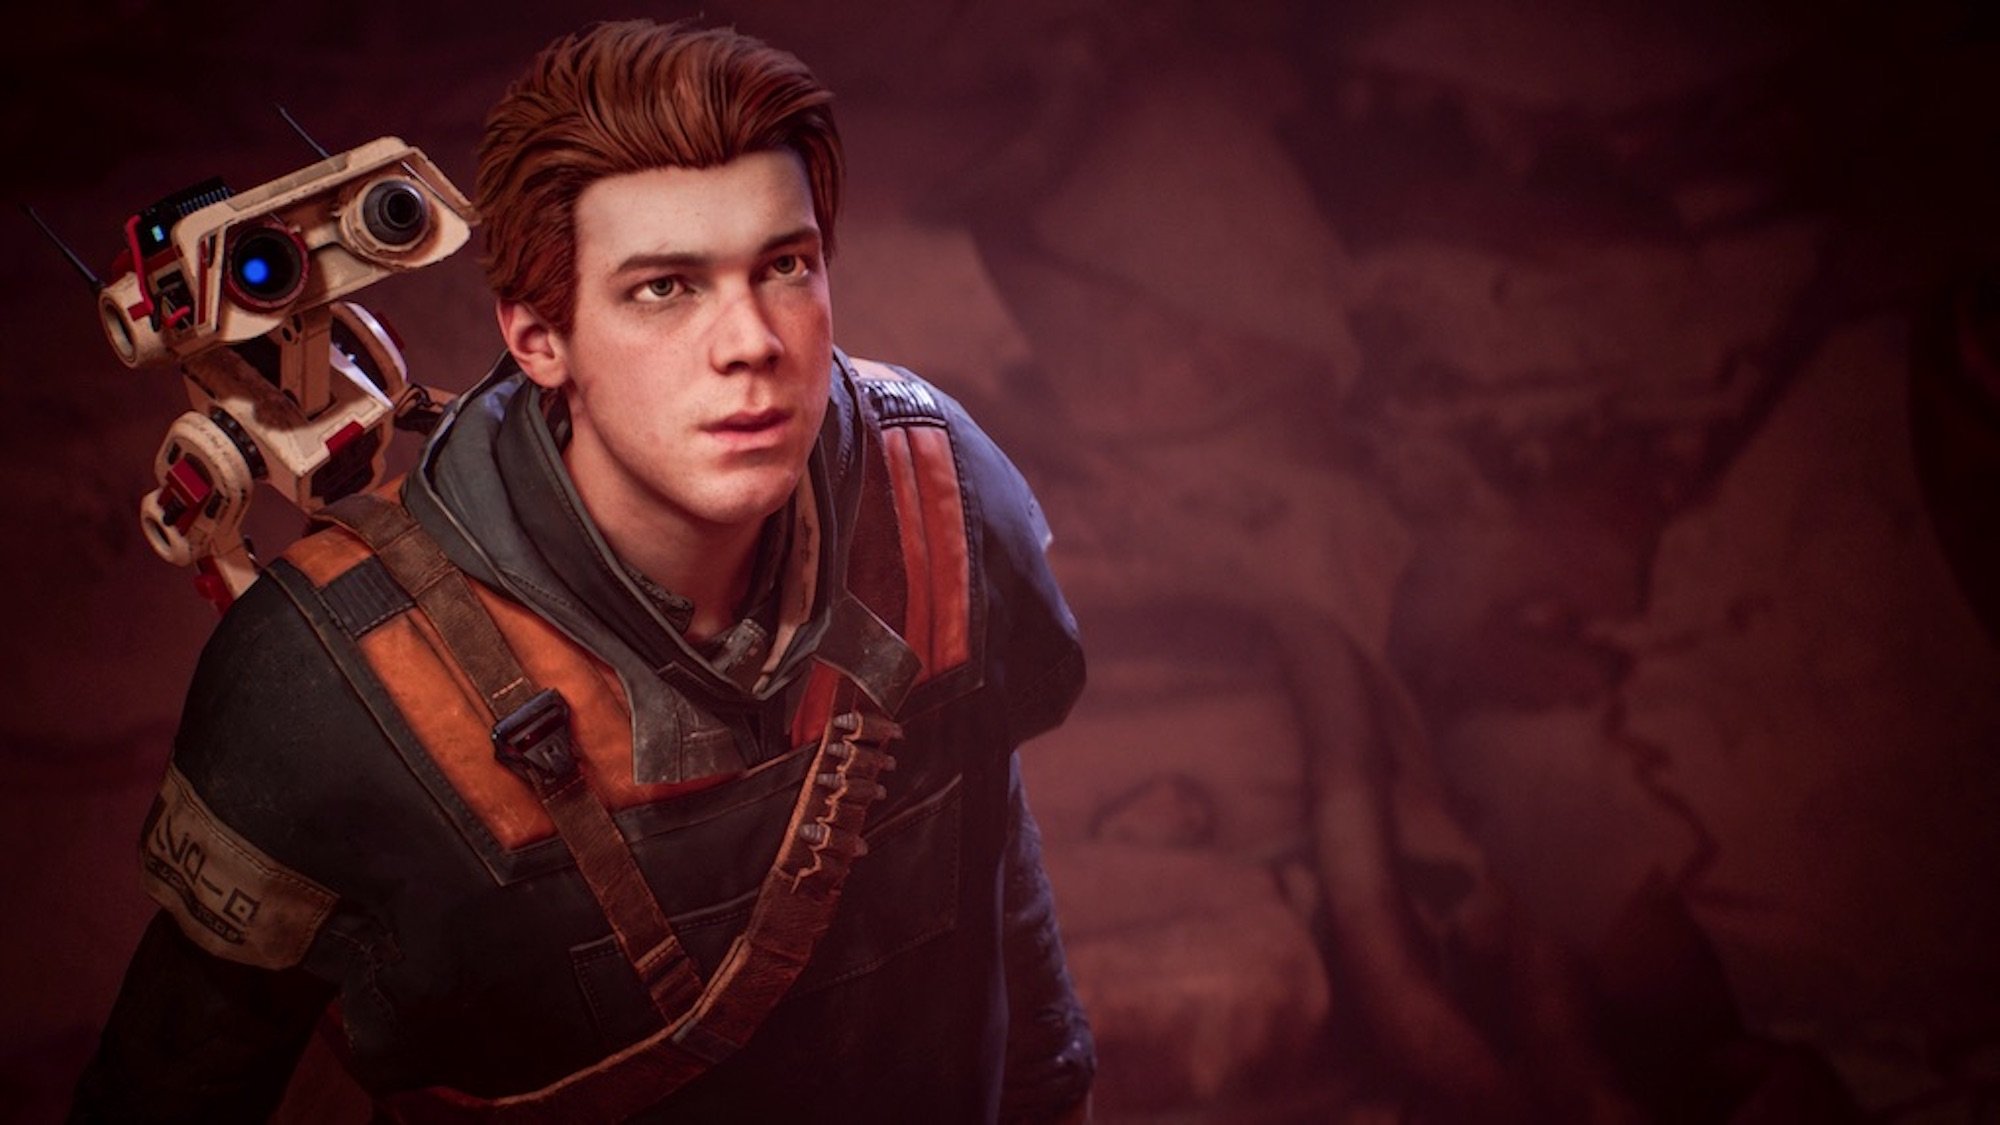 If ‘a Jedi: Fallen Order’ Sequel Happens, 1 Rumor Points To a Major Dark Side ‘Star Wars’ Cameo